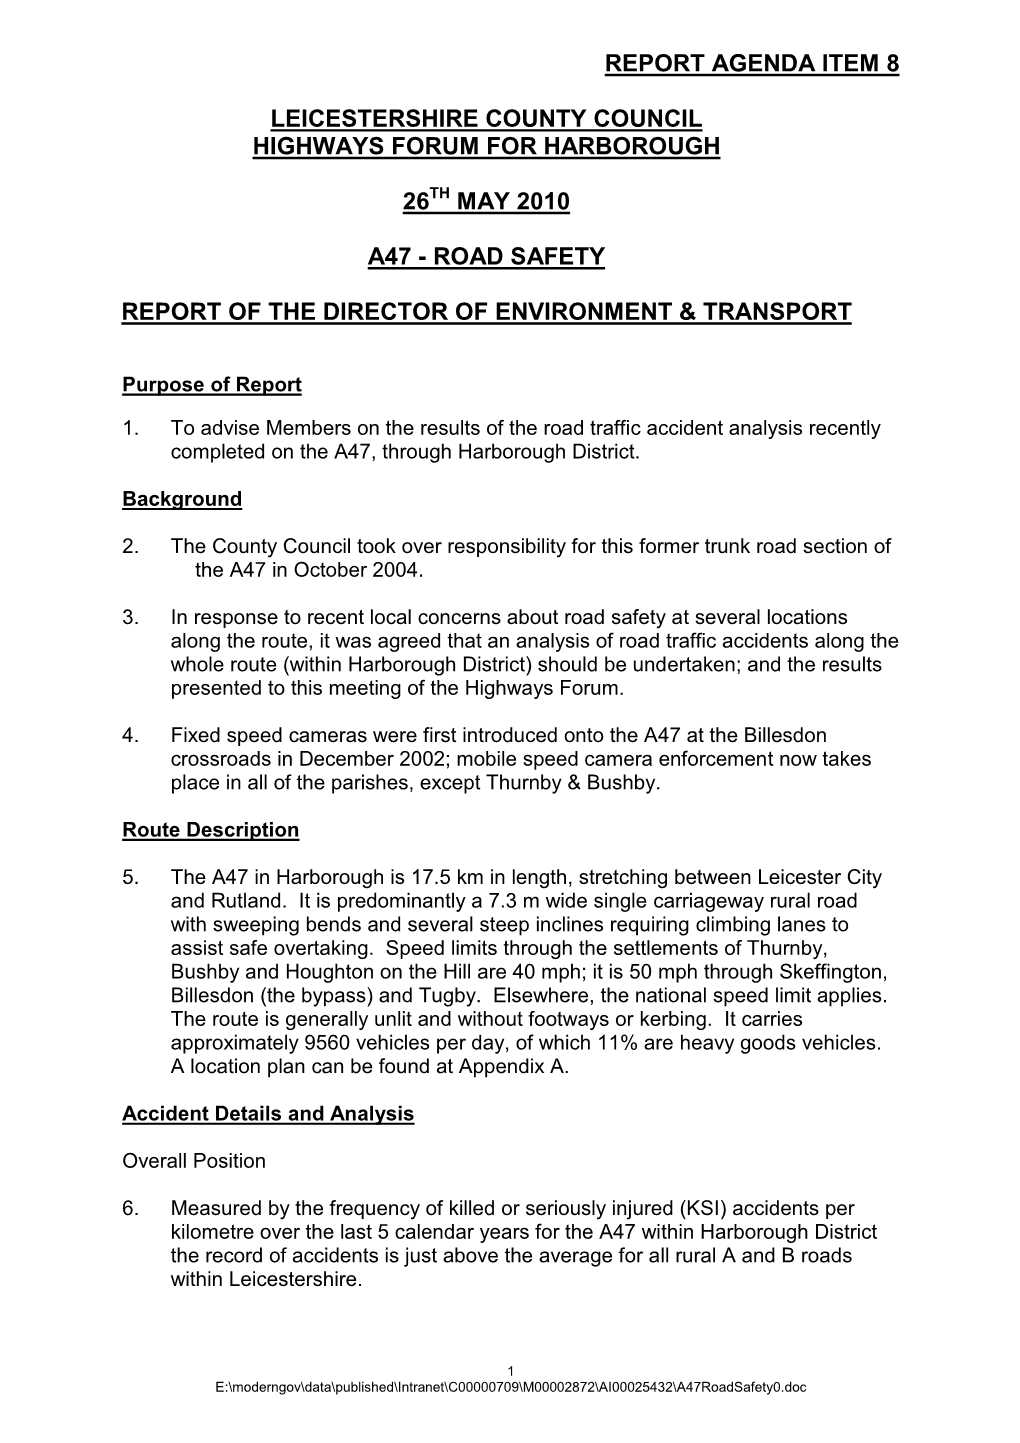 Report Agenda Item 8 Leicestershire County Council Highways Forum for Harborough 26 May 2010